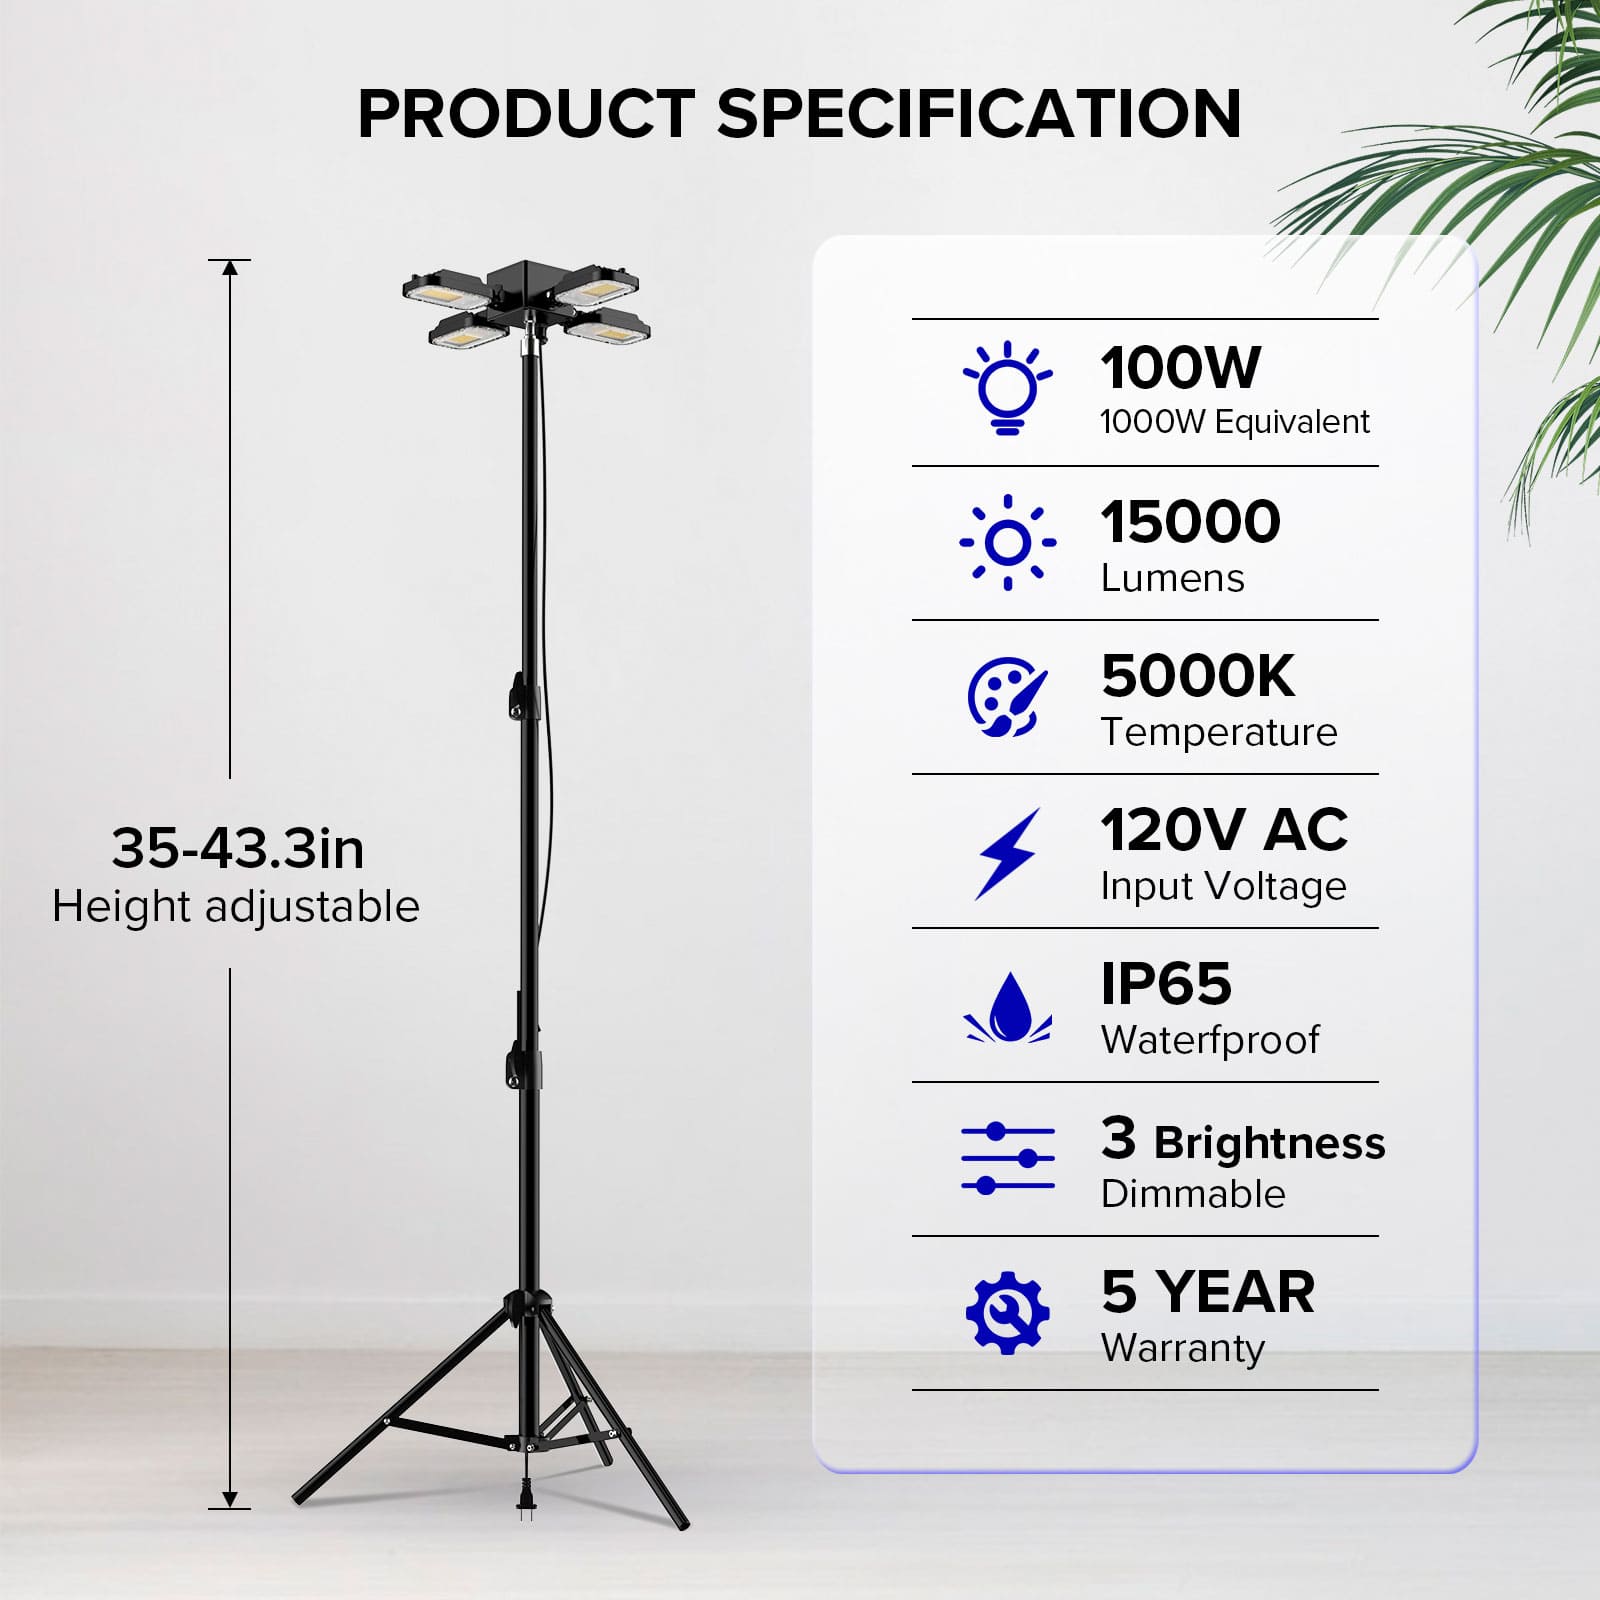 100W Adjustable 4-Head Work Light with Stand, 35-43.3in height adjuatable.